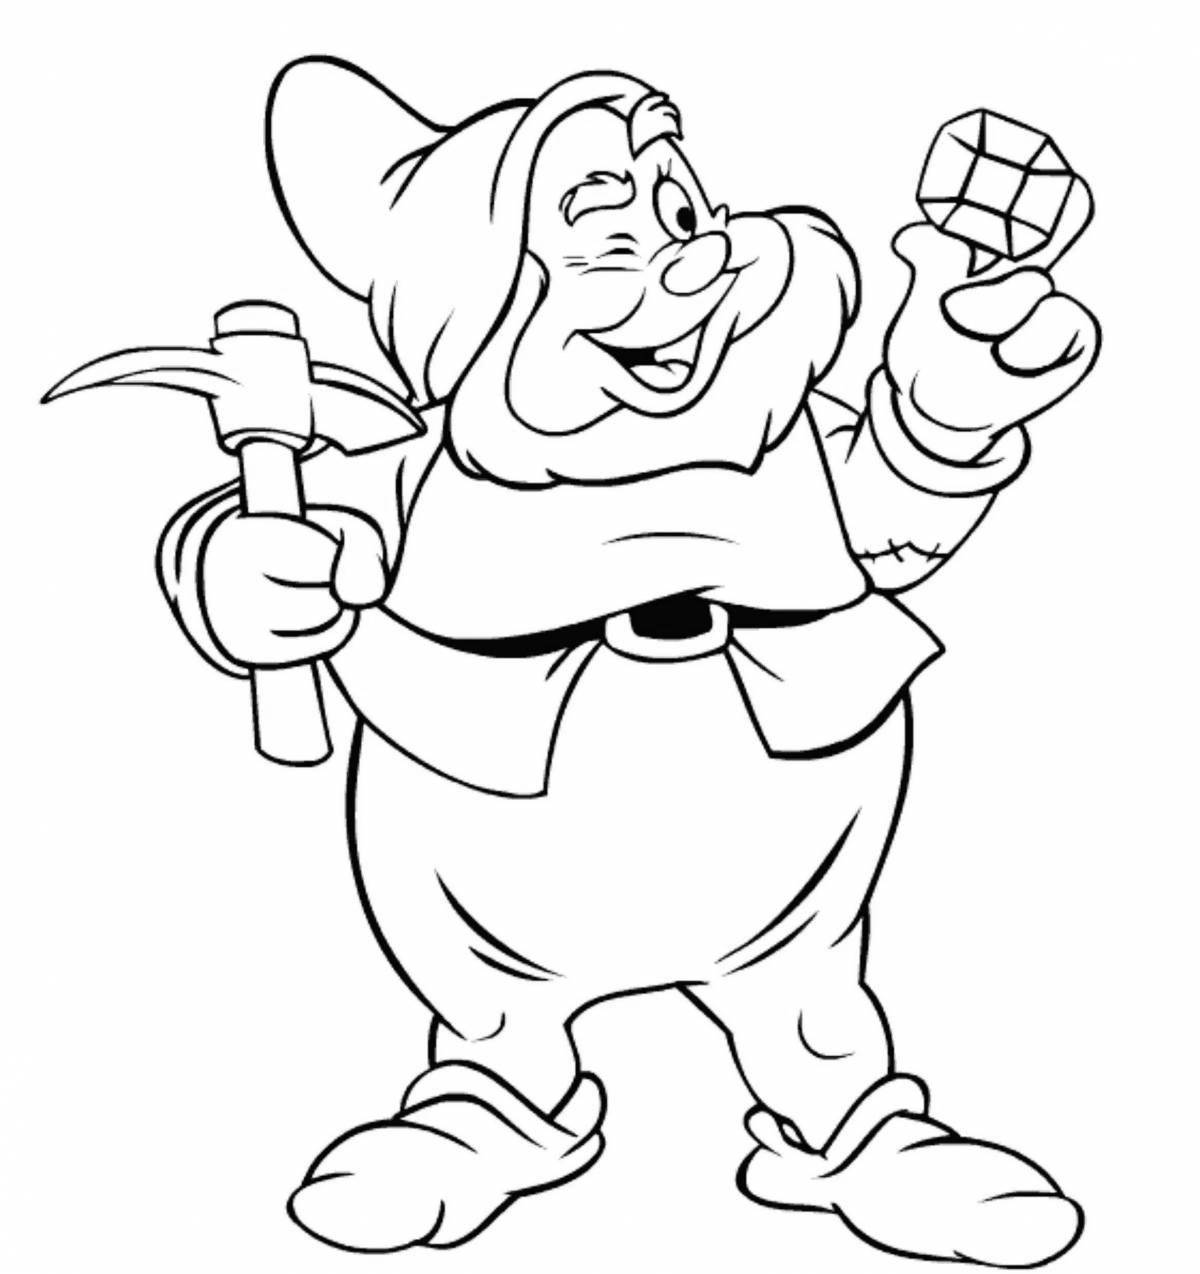 Coloring page funny dwarf